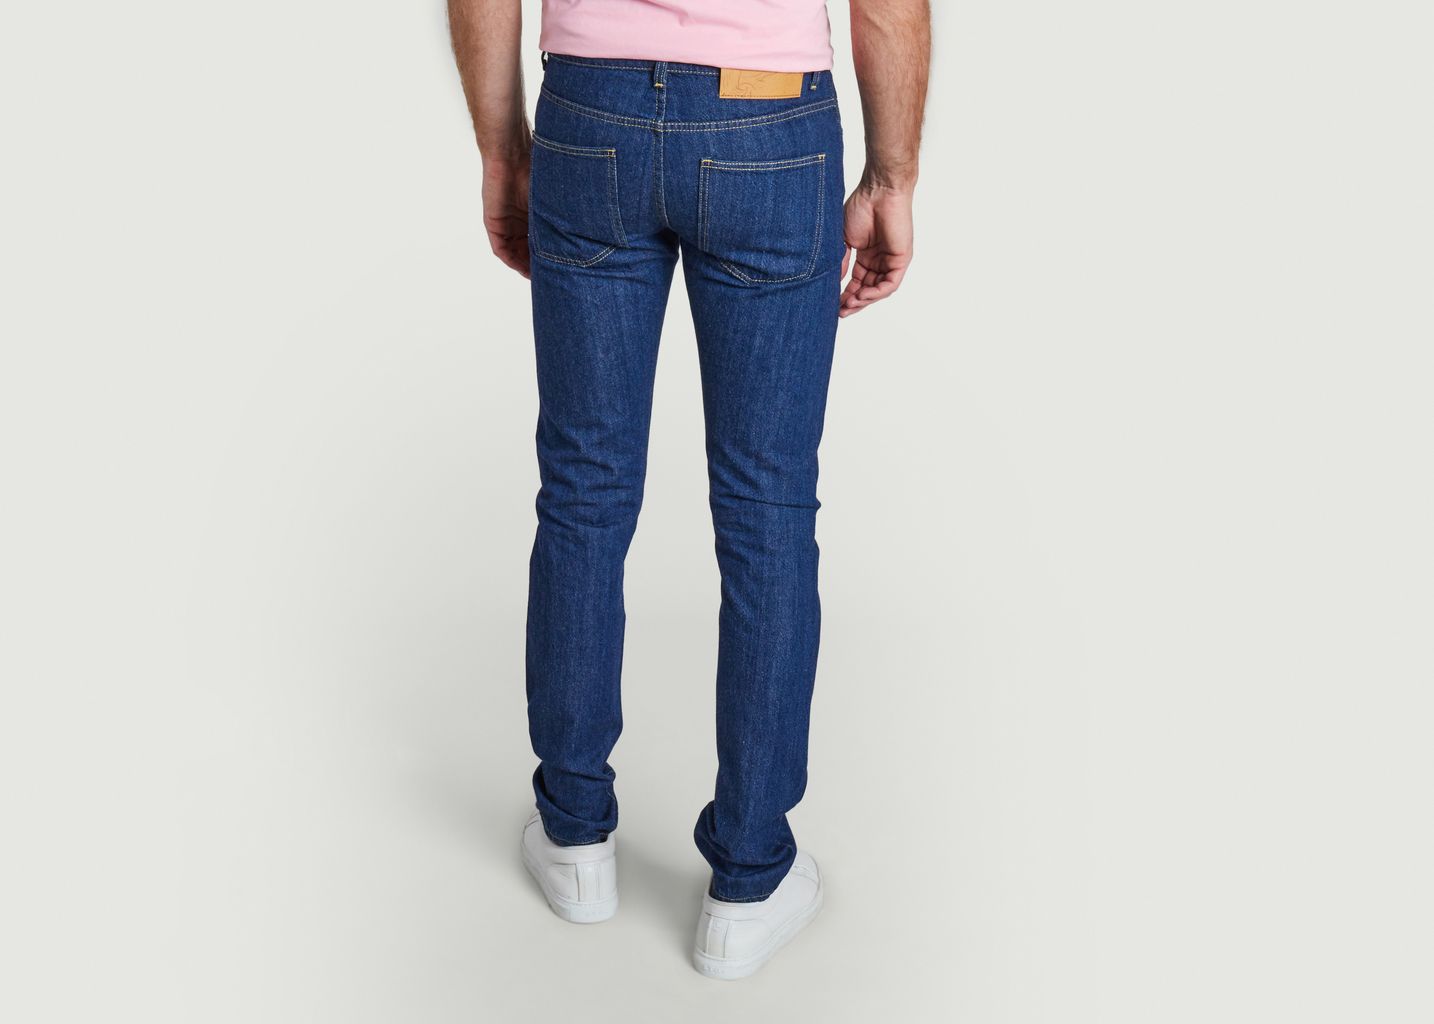 Jeans New Frontier Selvedge Super Guy, - Naked and Famous